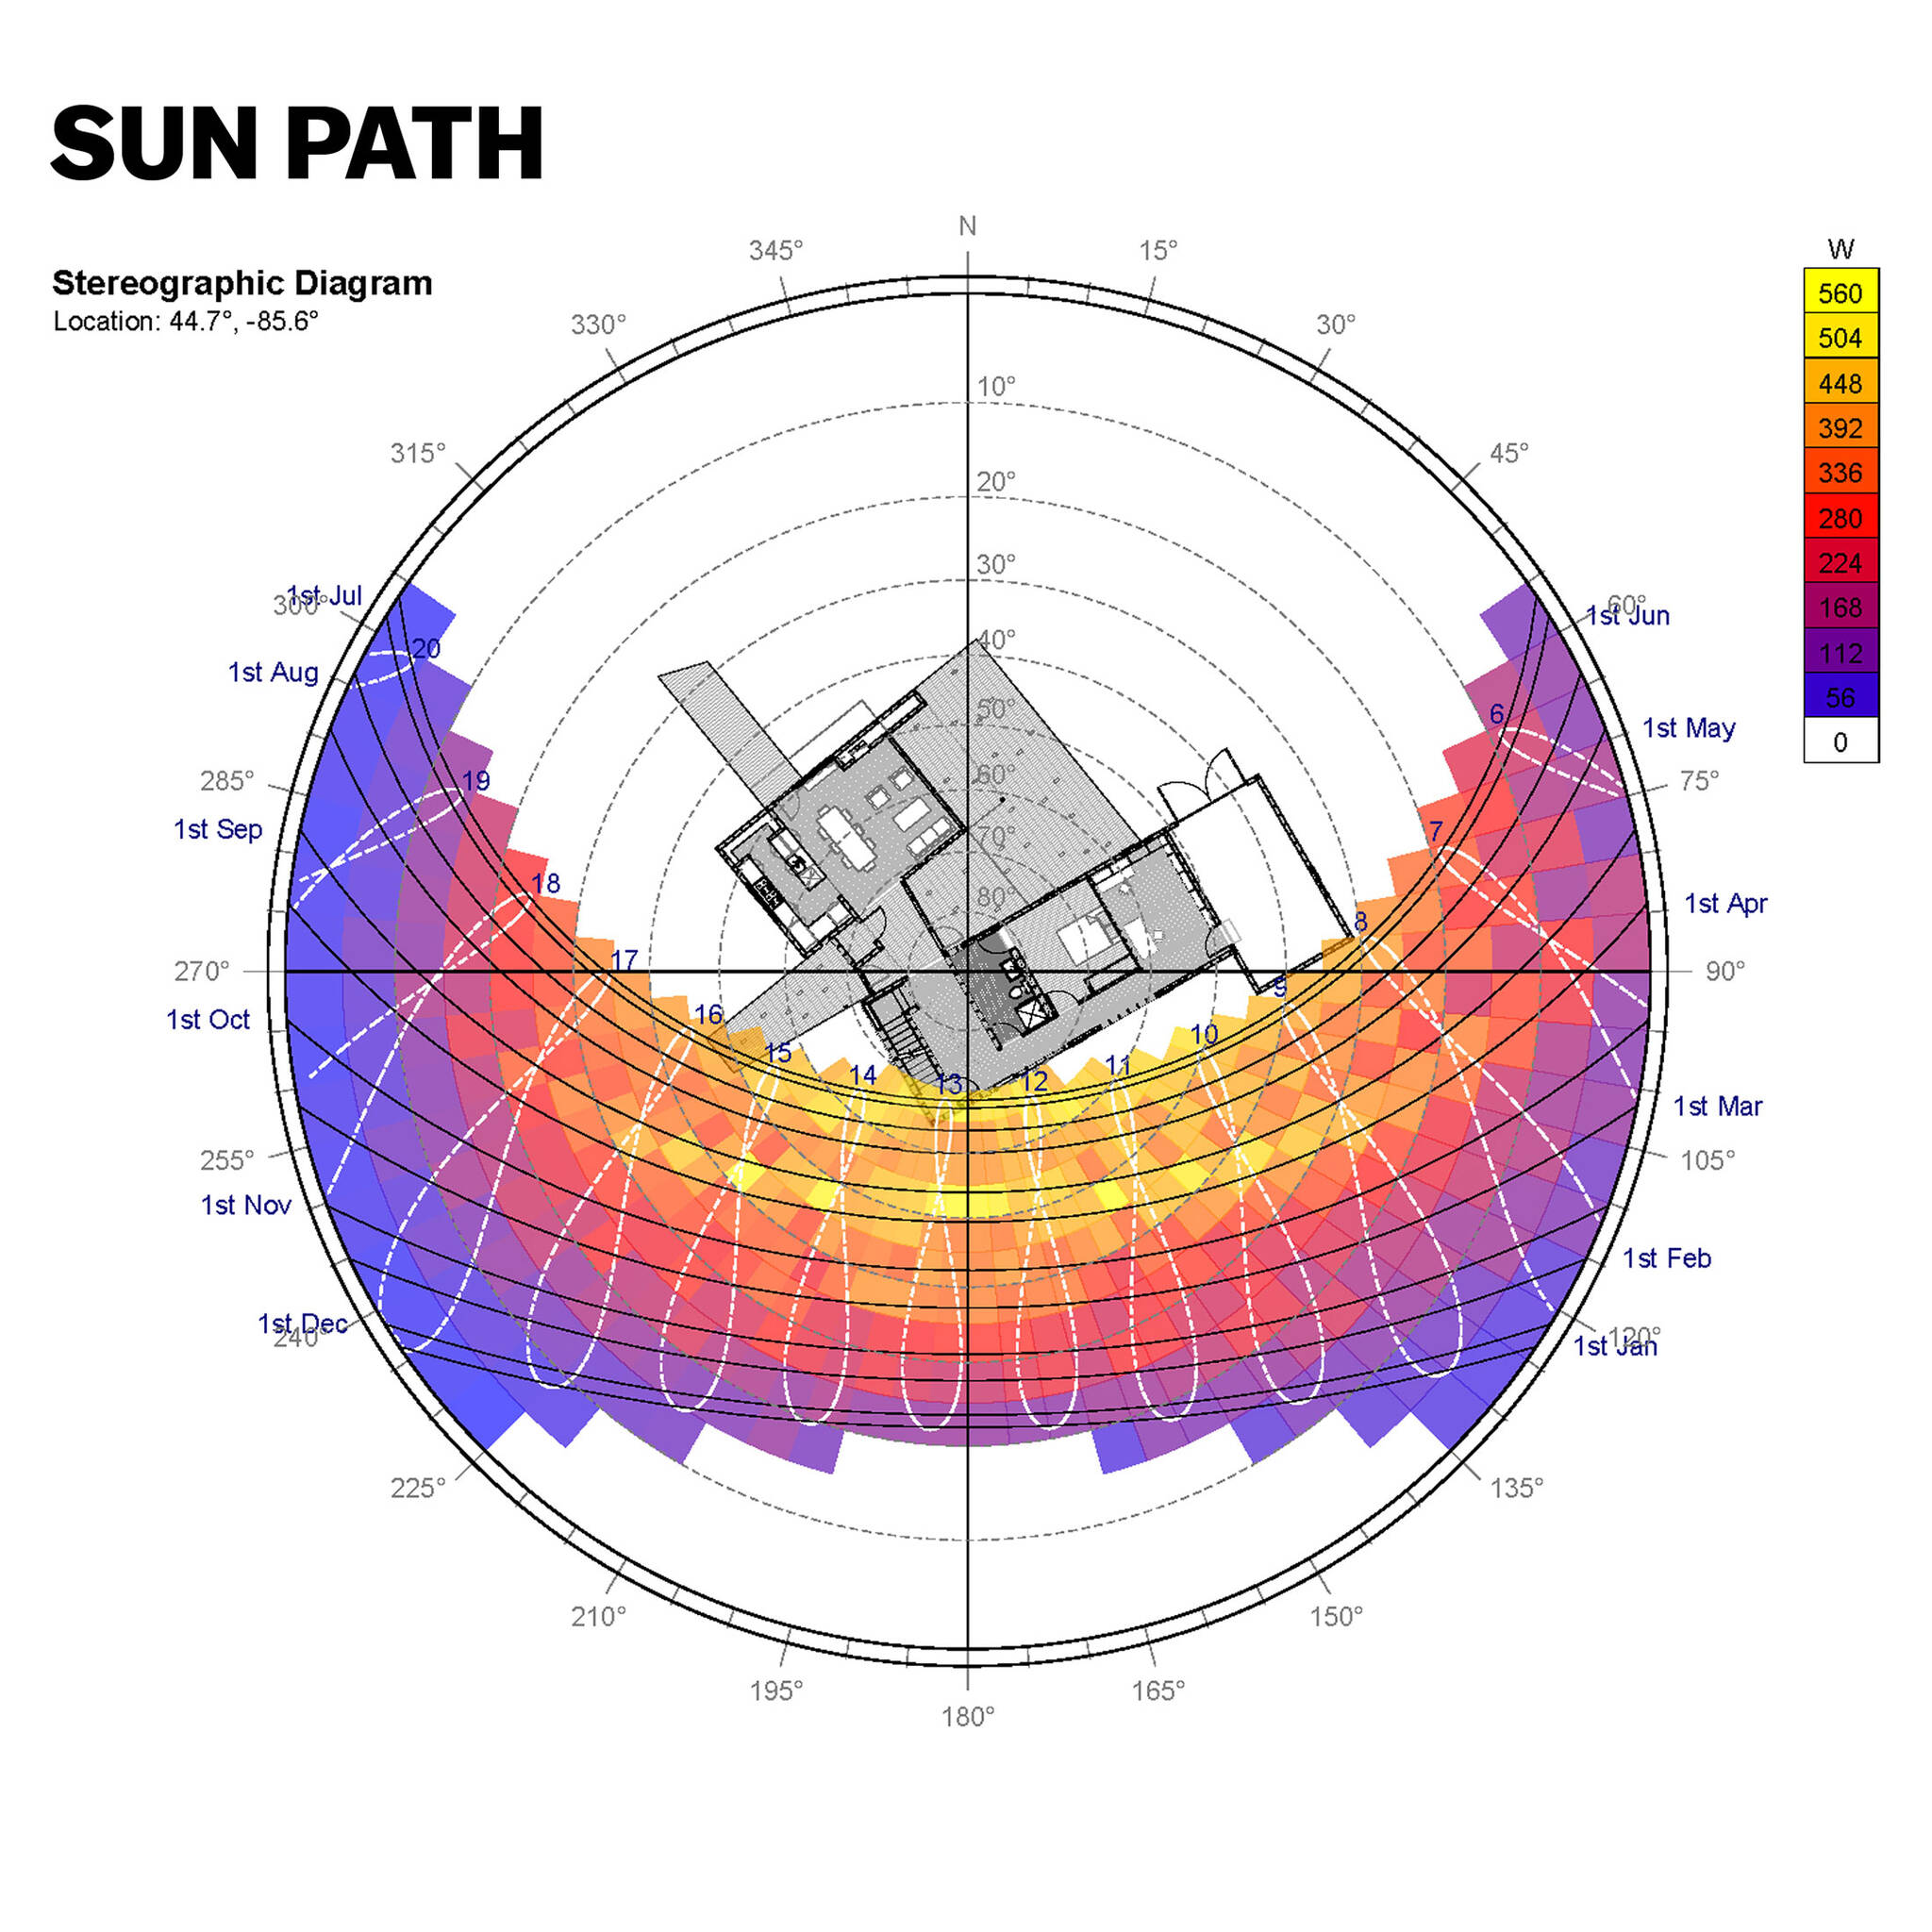 Stereographic diagram of the sun path on the sustainable lake house project in Omena, Michigan designed by the architecture studio Danny Forster & Architecture